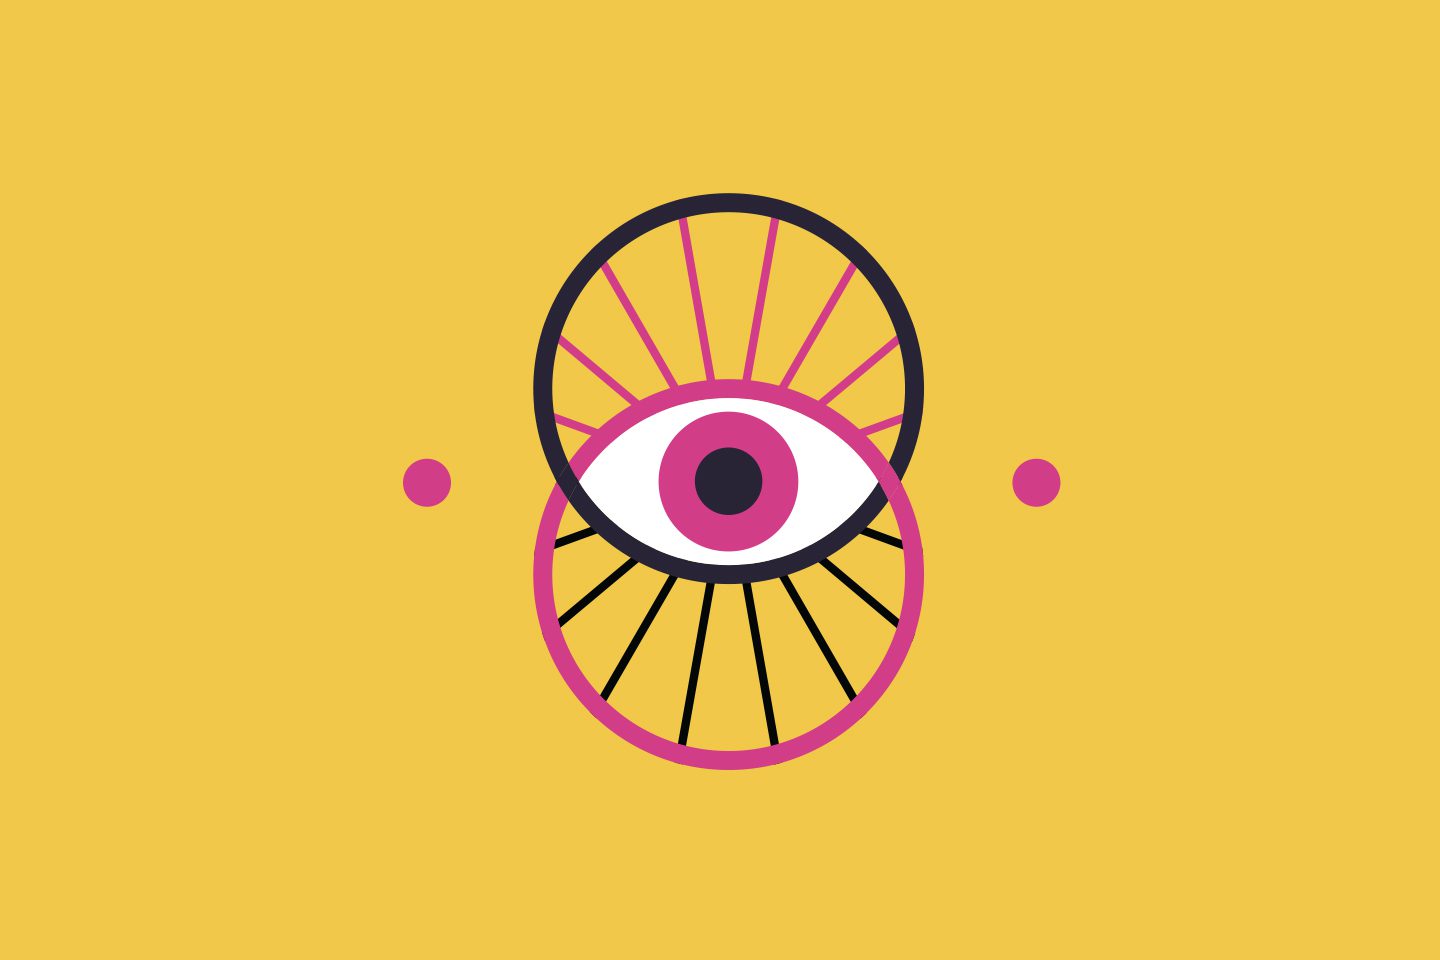 illustration of an eye on a yellow background